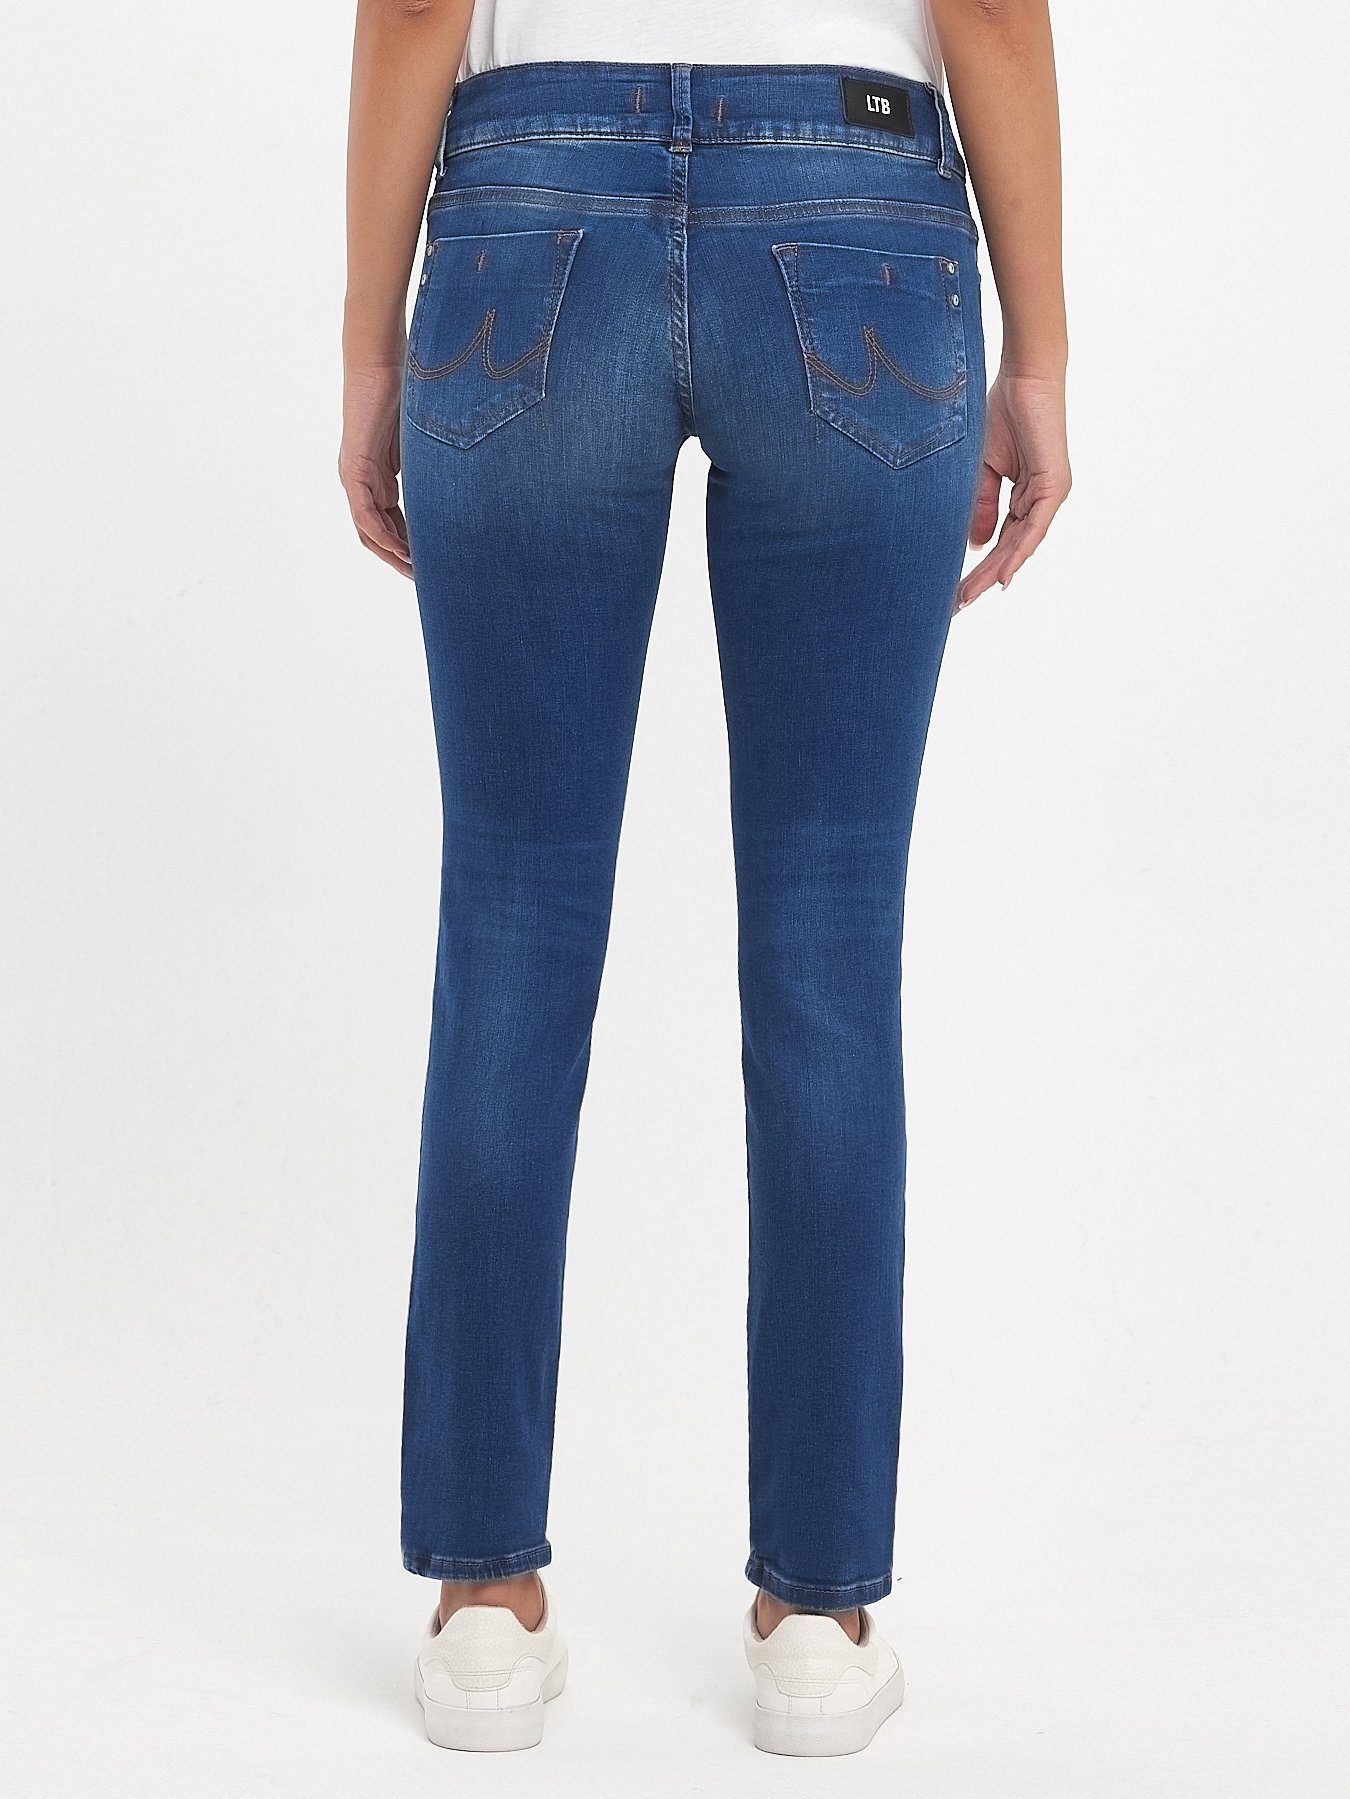 Wash Heal LTB LTB Slim-fit-Jeans Jeans Molly